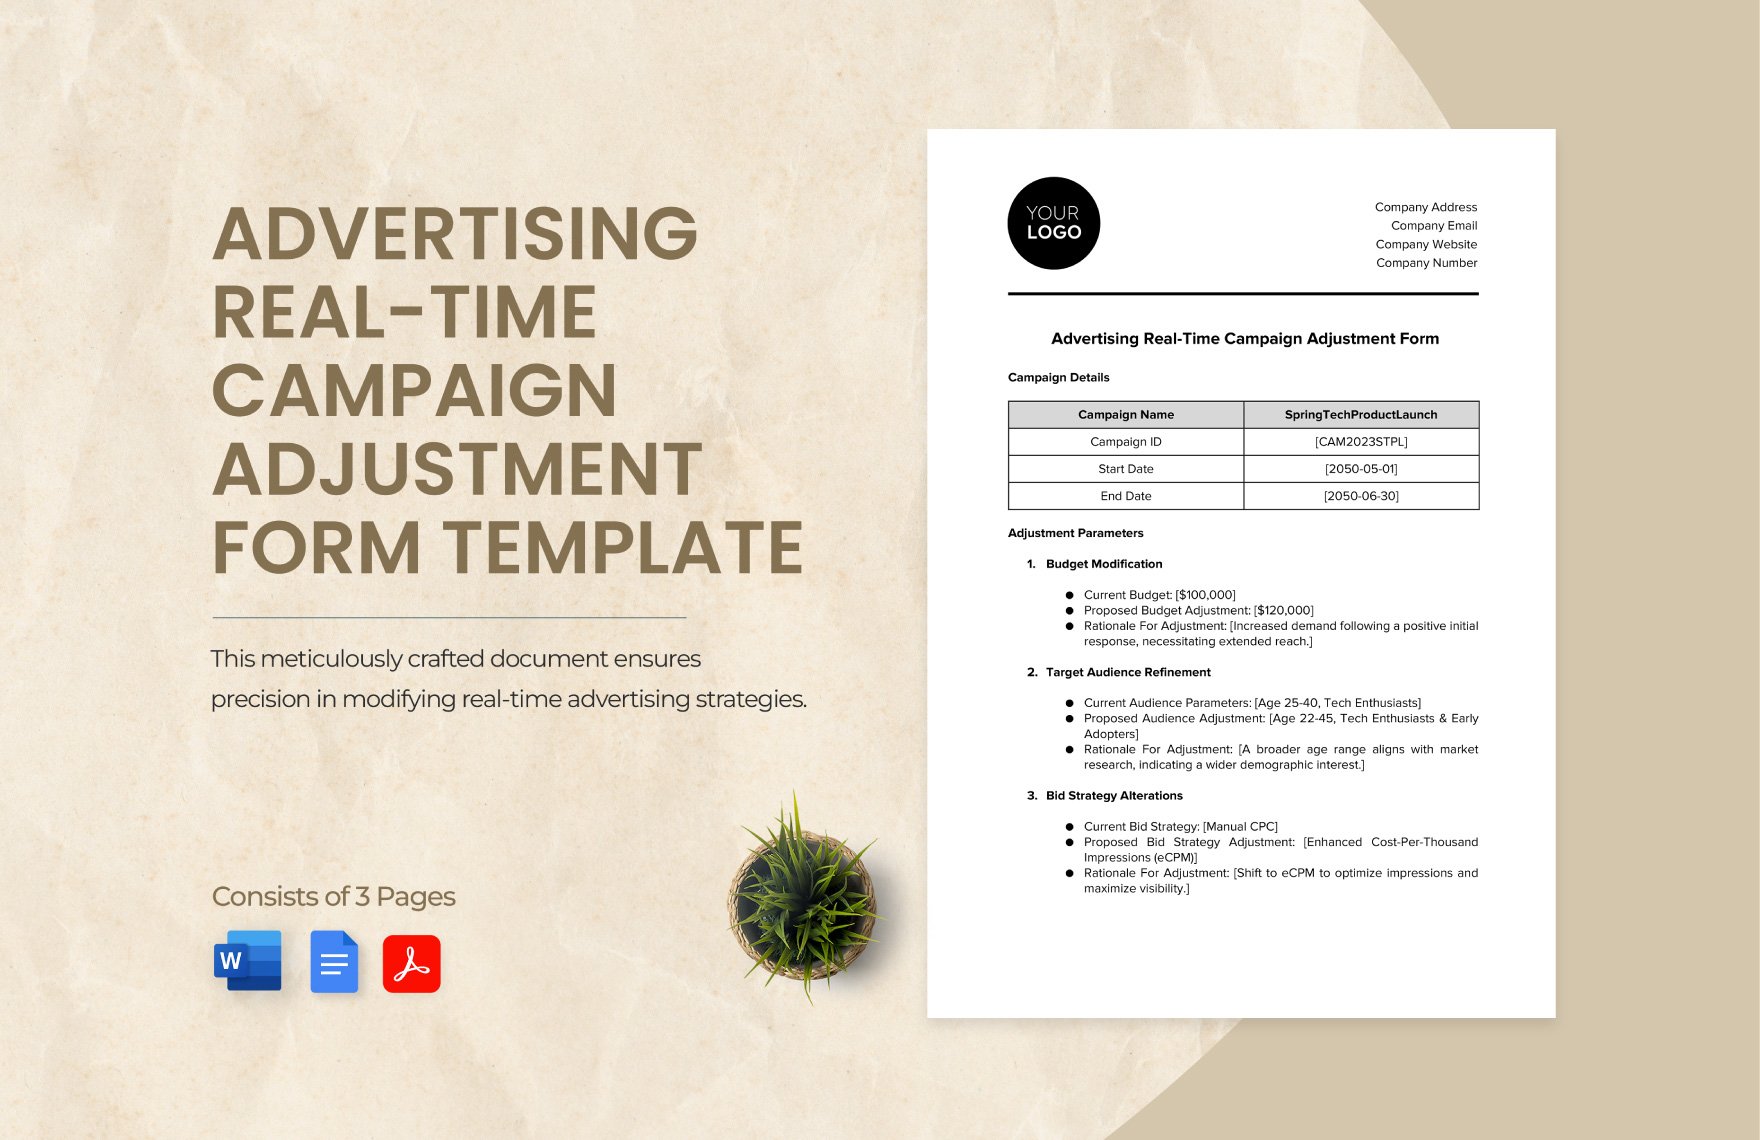 Advertising Real-time Campaign Adjustment Form Template in Word, Google Docs, PDF